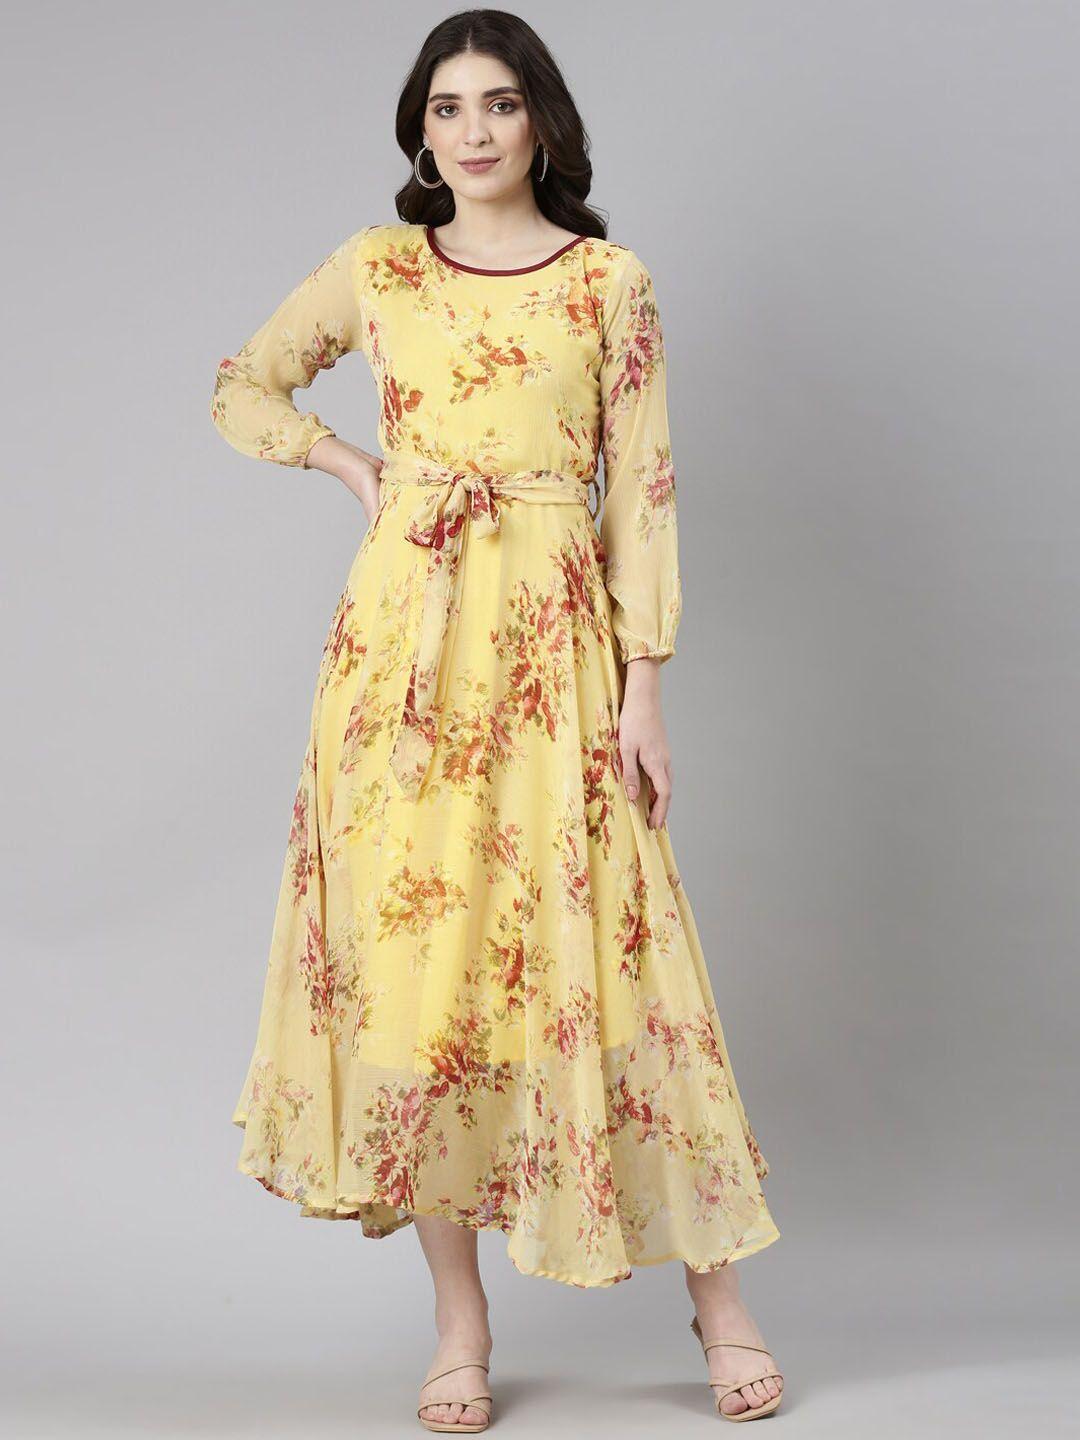 souchii-floral-printed-cuffed-sleeves-chiffon-fit-and-flare-midi-ethnic-dress